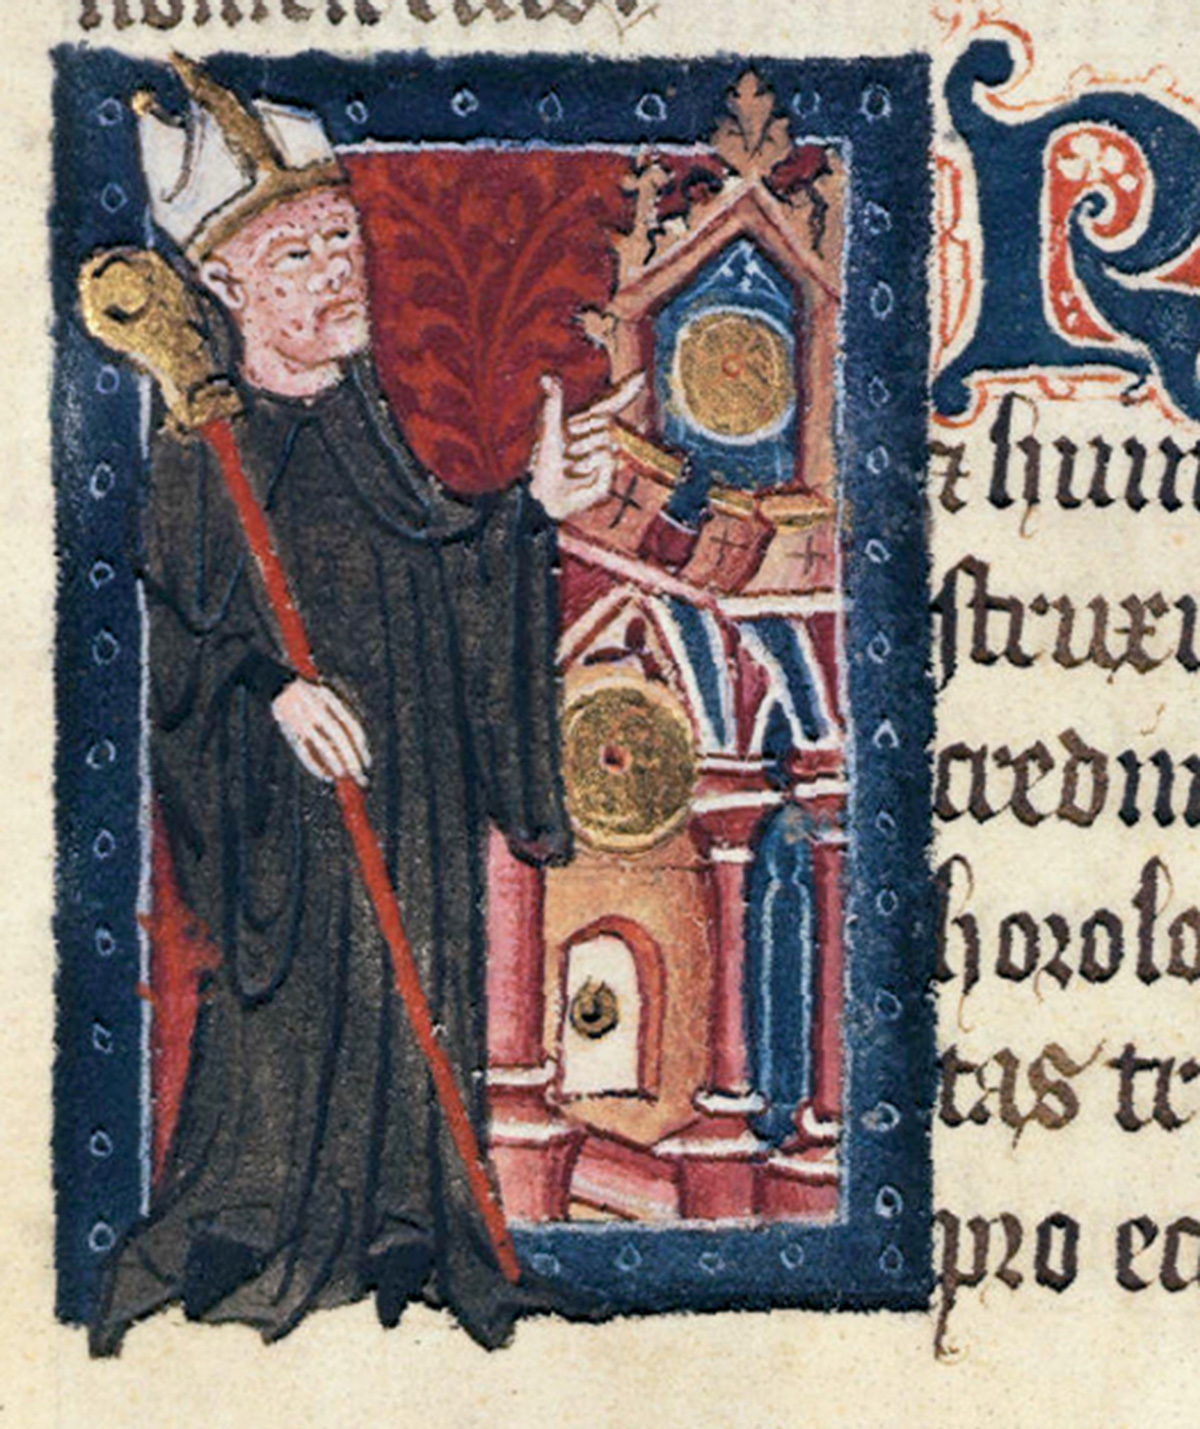 A medieval miniature depicting Abbott John of Wallingford pointing to a clock face.